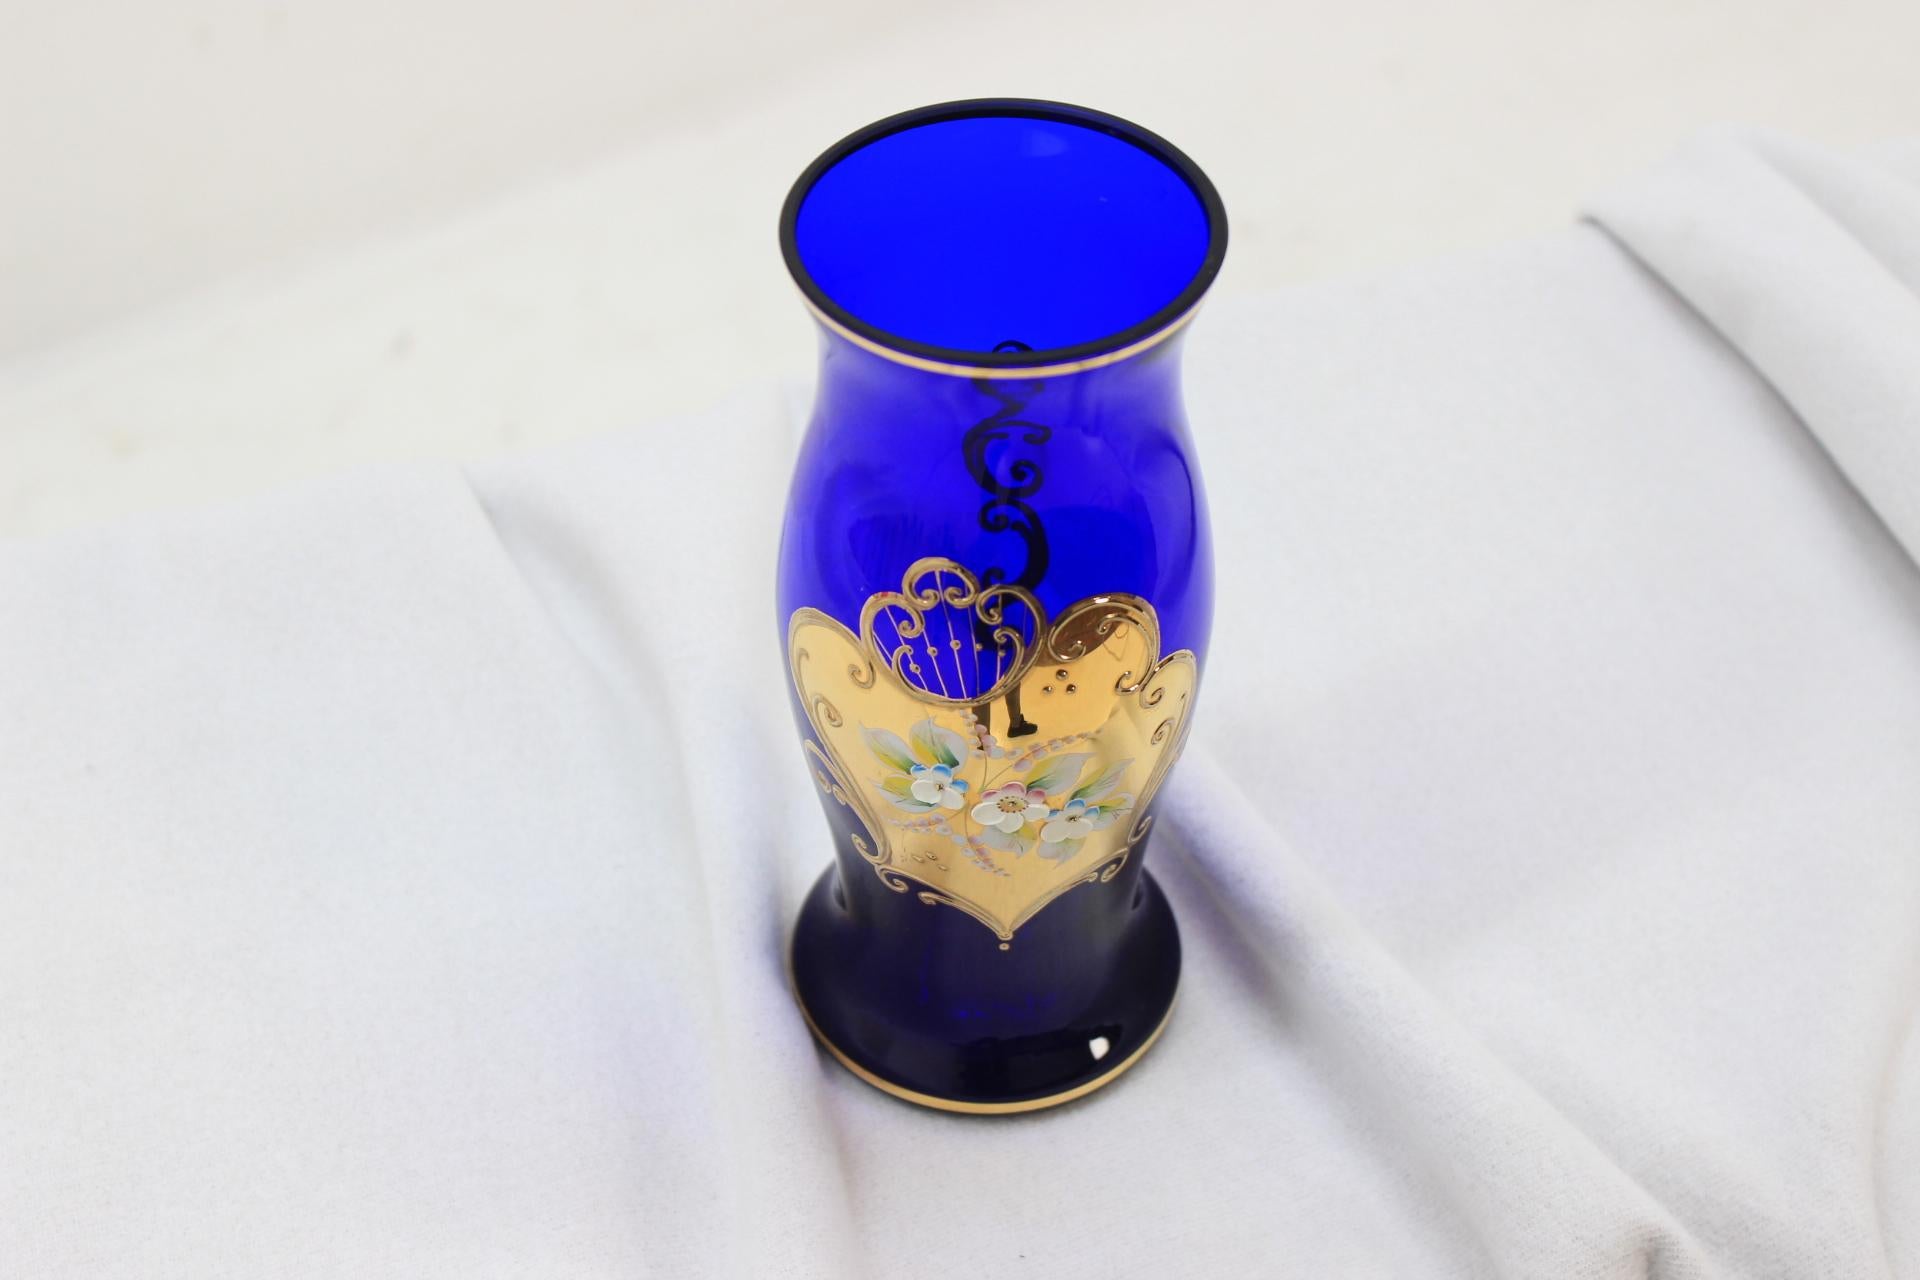 The item made of blue cobalt glass, hand-painted. Made in Czechoslovakia. Original condition.